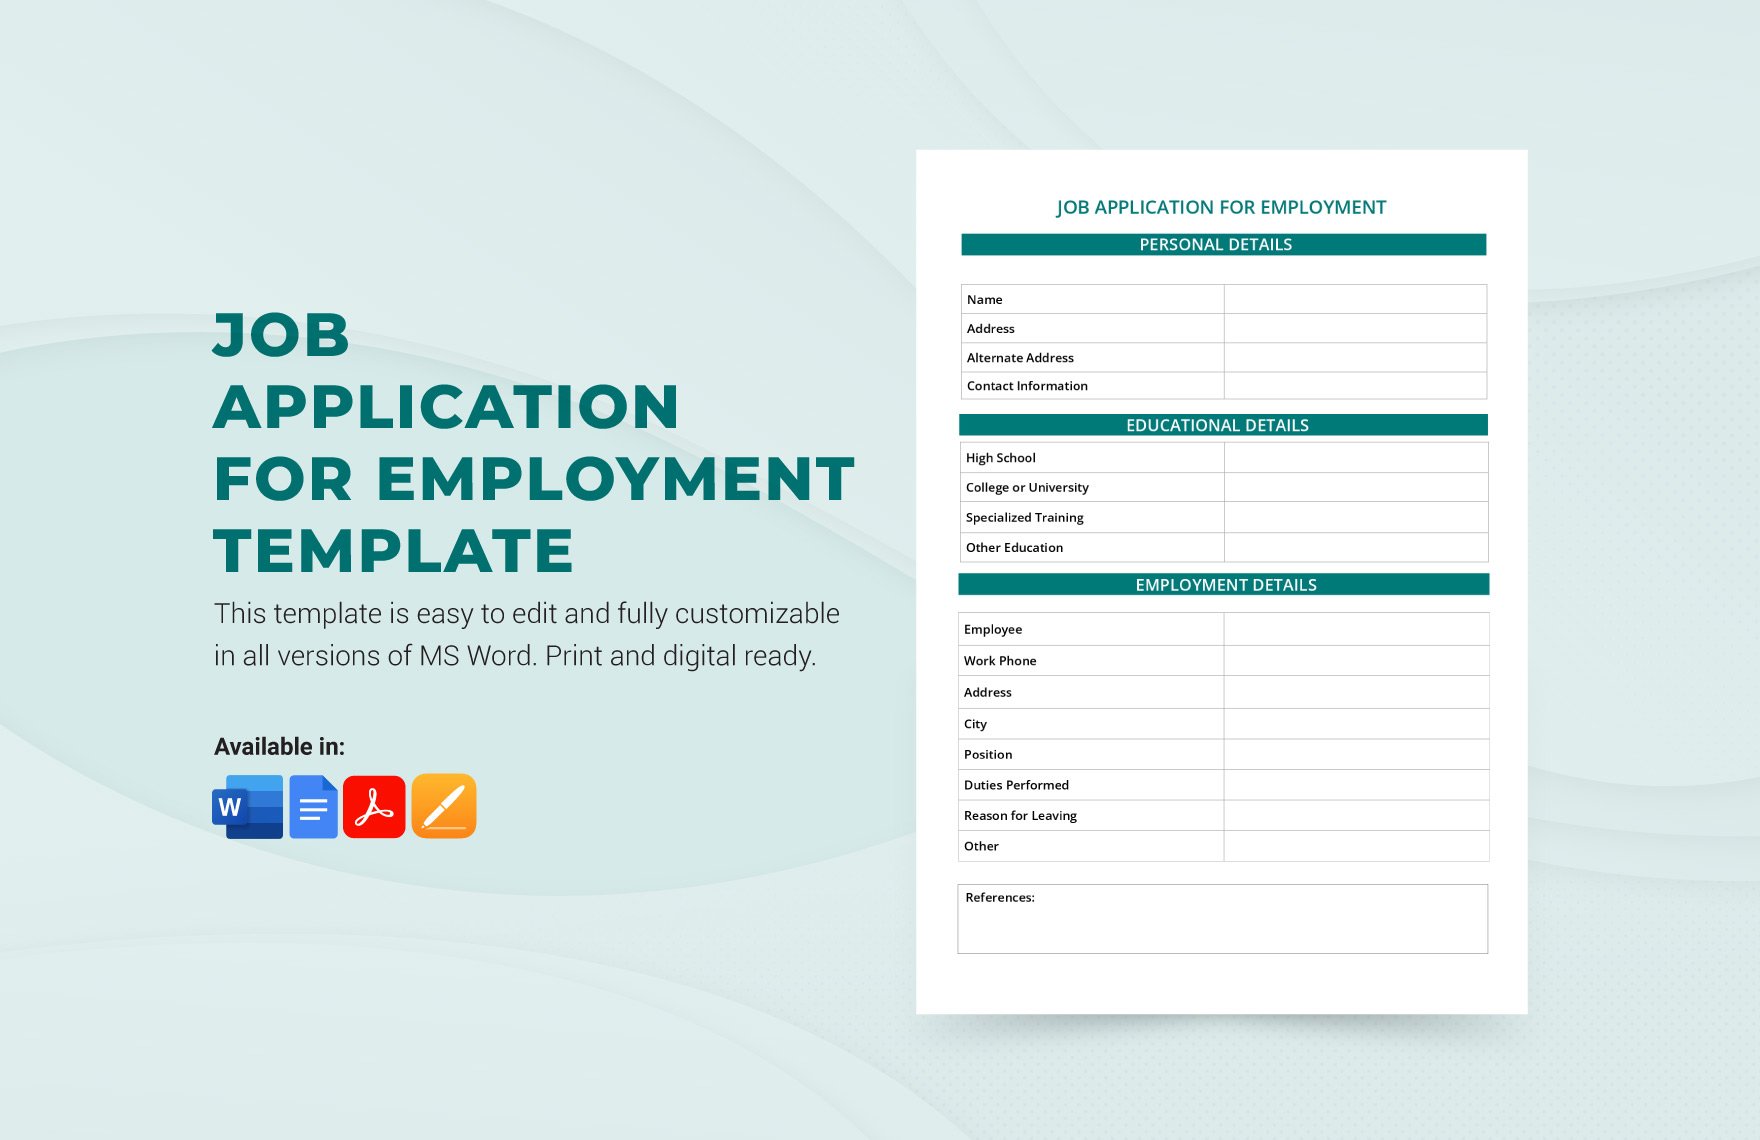 Job Application for Employment Template in Word, Google Docs, PDF, Apple Pages